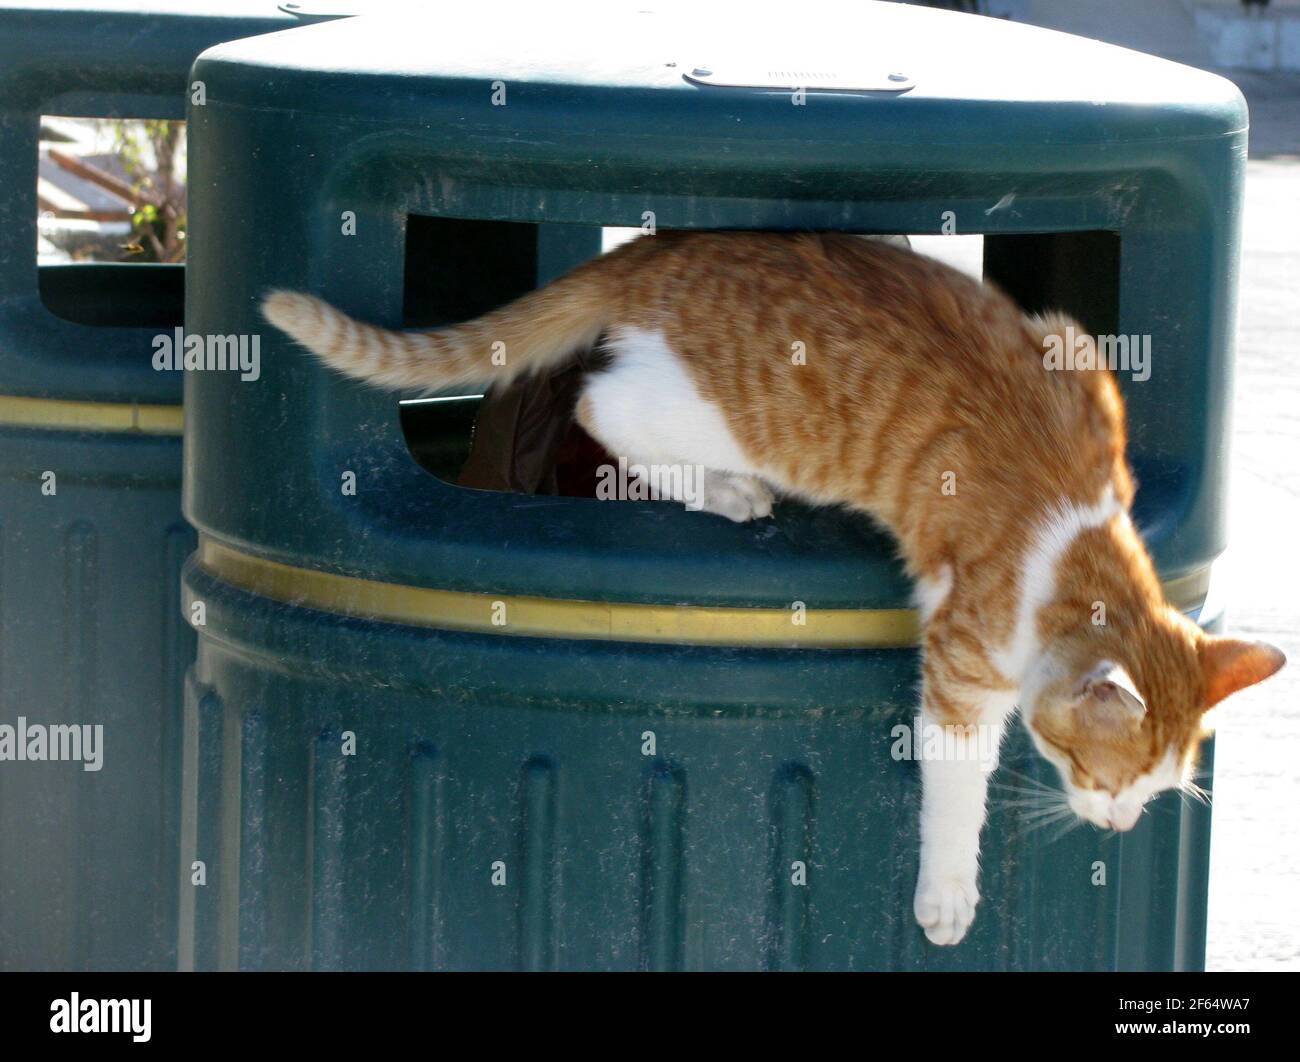 little young cat jumps out of a wastebin Stock Photo